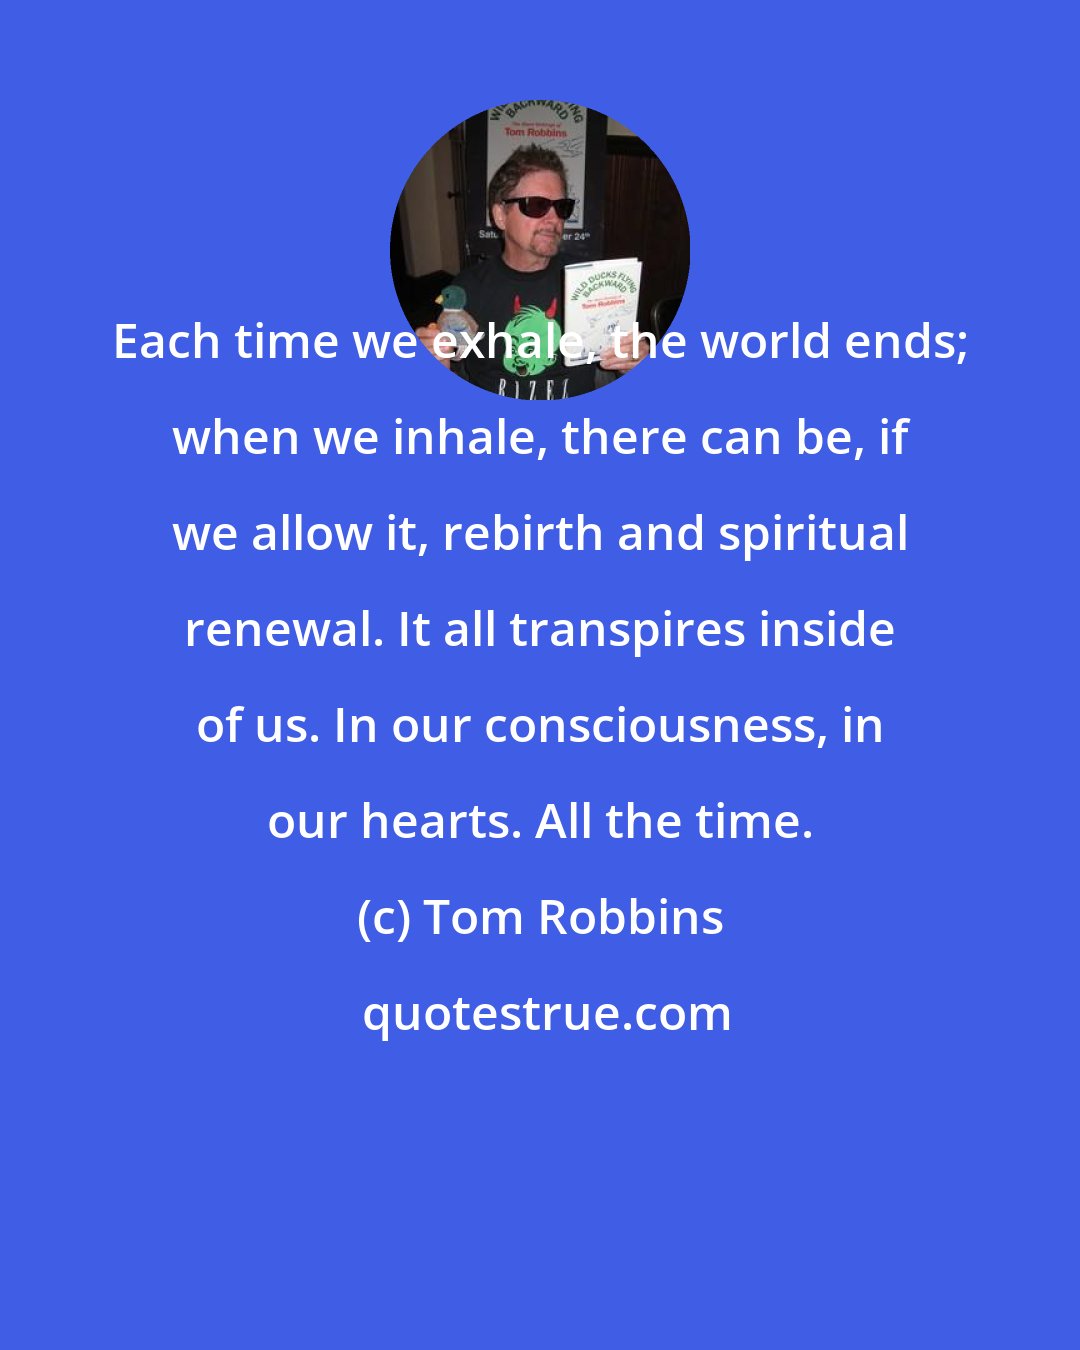 Tom Robbins: Each time we exhale, the world ends; when we inhale, there can be, if we allow it, rebirth and spiritual renewal. It all transpires inside of us. In our consciousness, in our hearts. All the time.